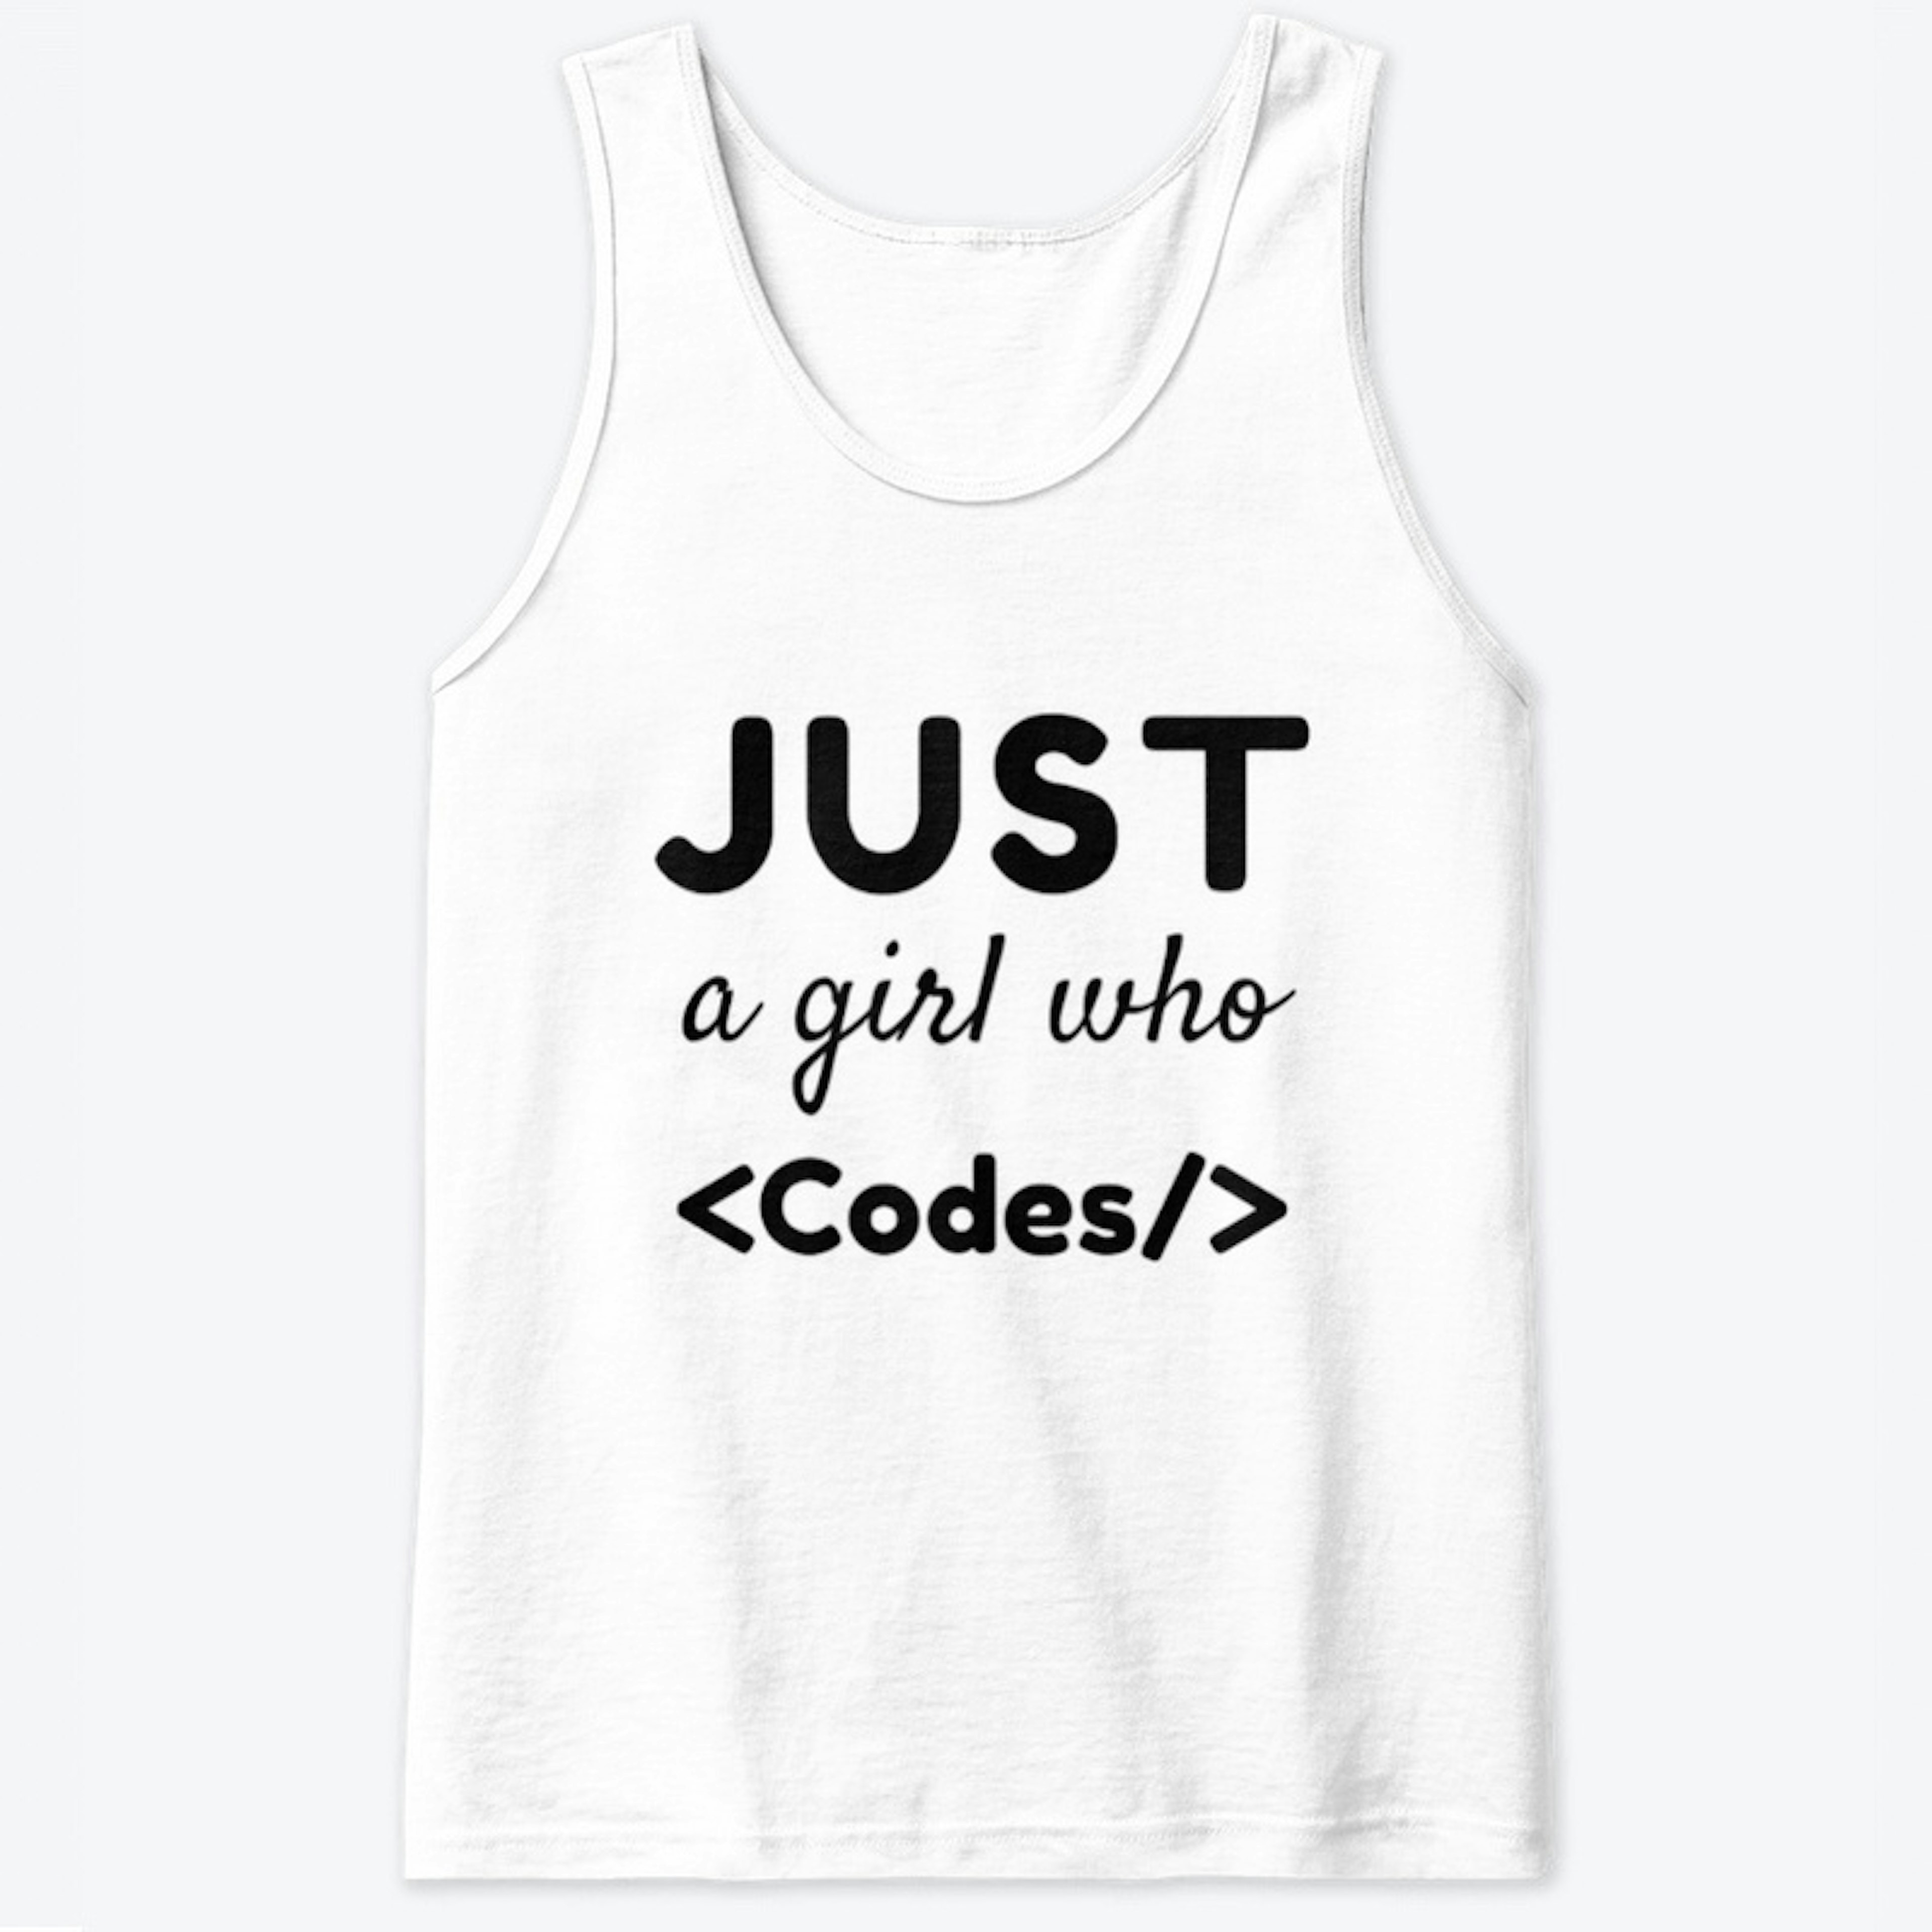 Just a girl who codes